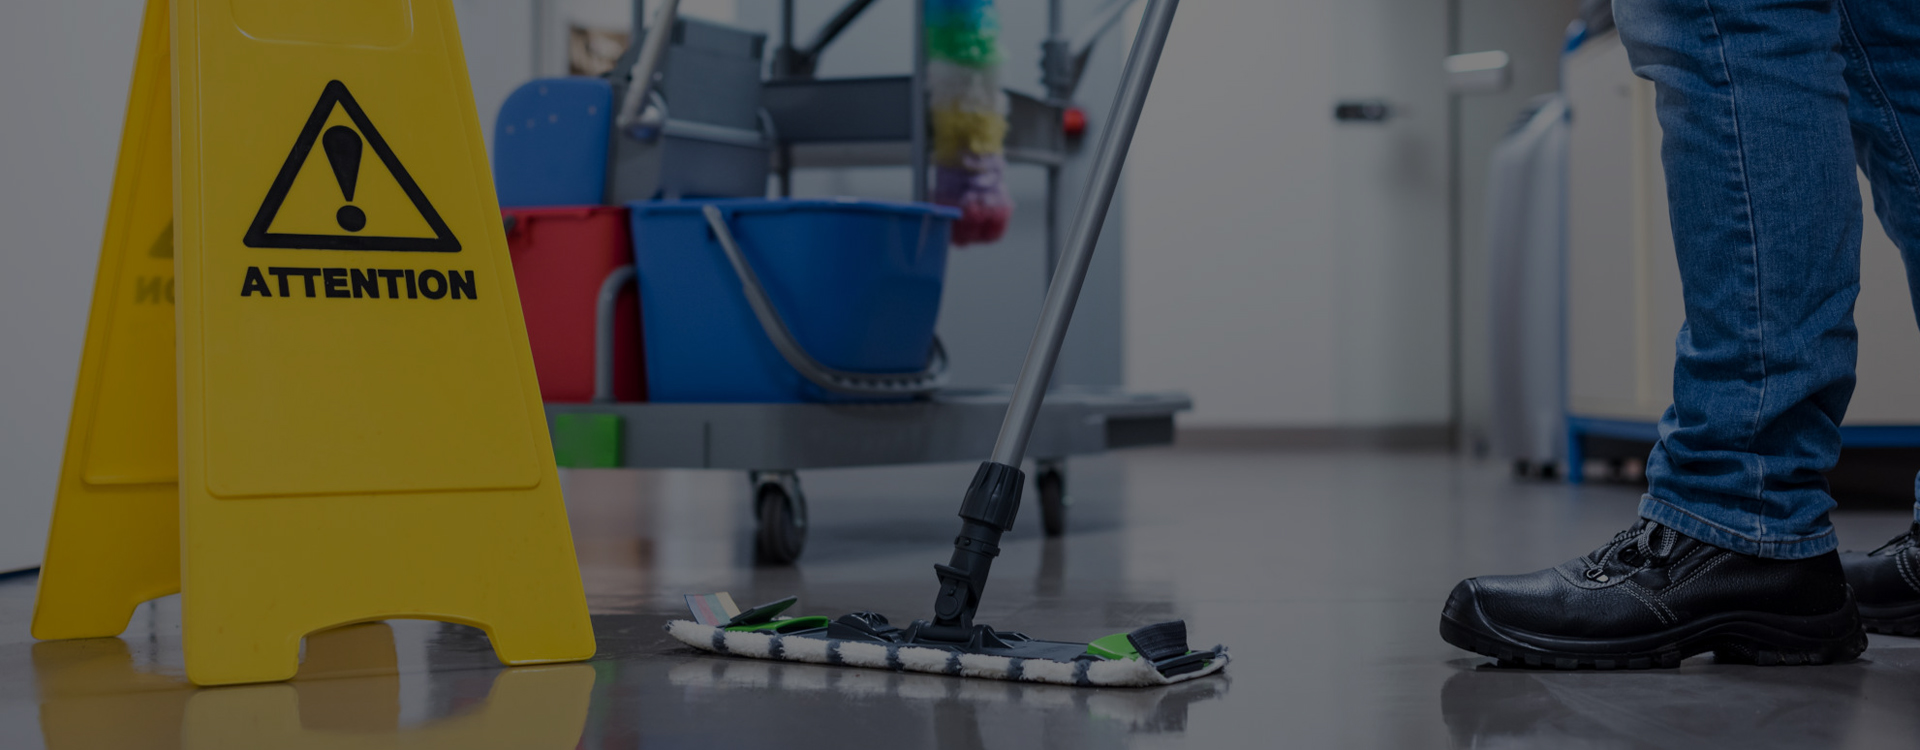 Commercial Cleaning Services near me in Melbourne, Commercial Cleaners